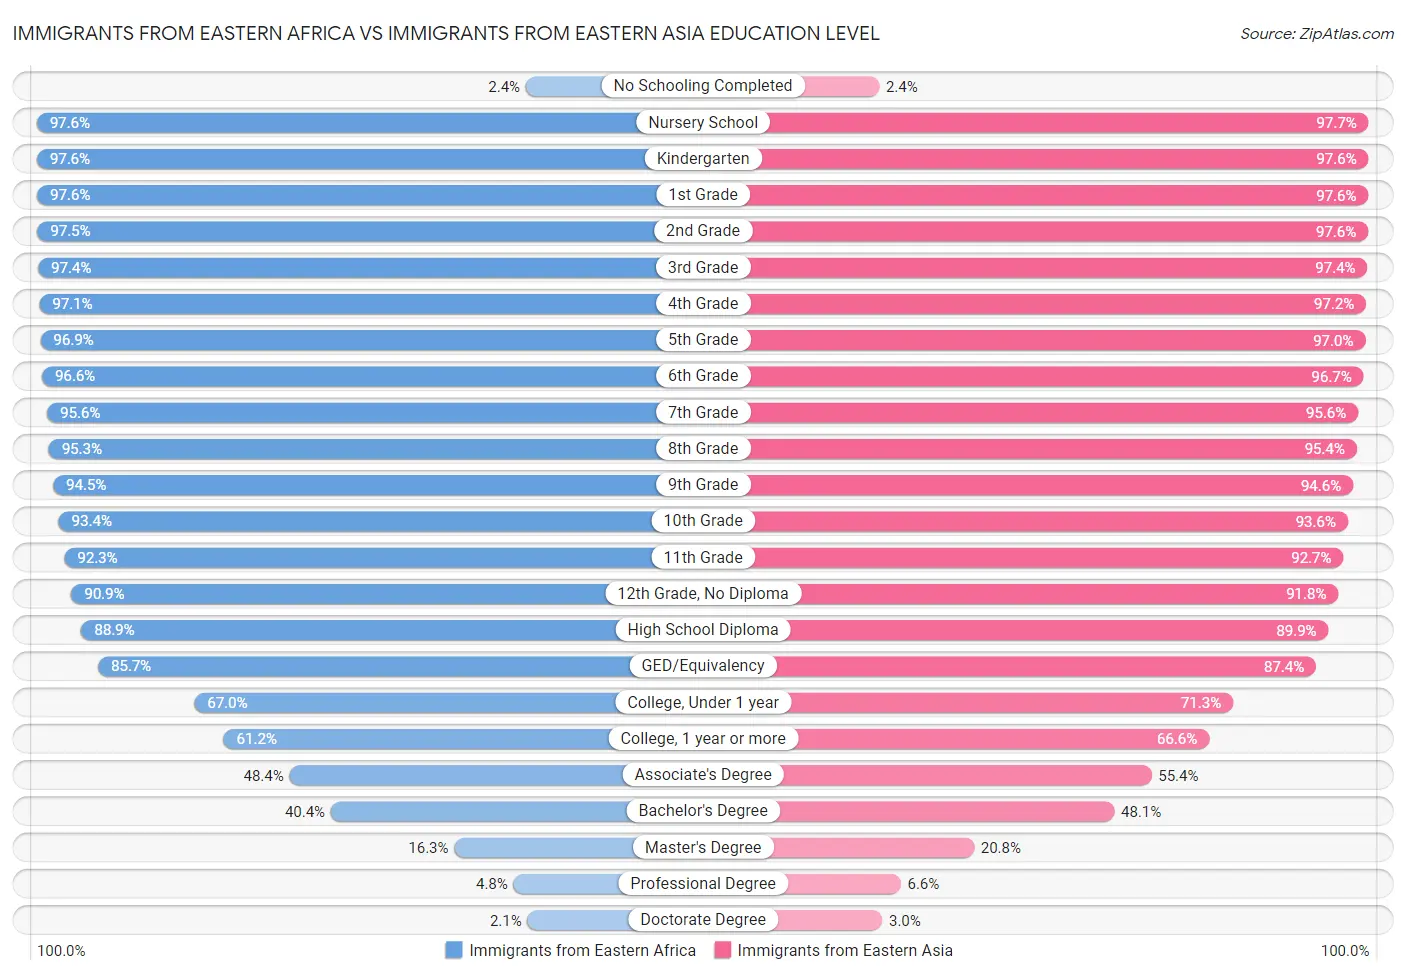 Immigrants from Eastern Africa vs Immigrants from Eastern Asia Education Level